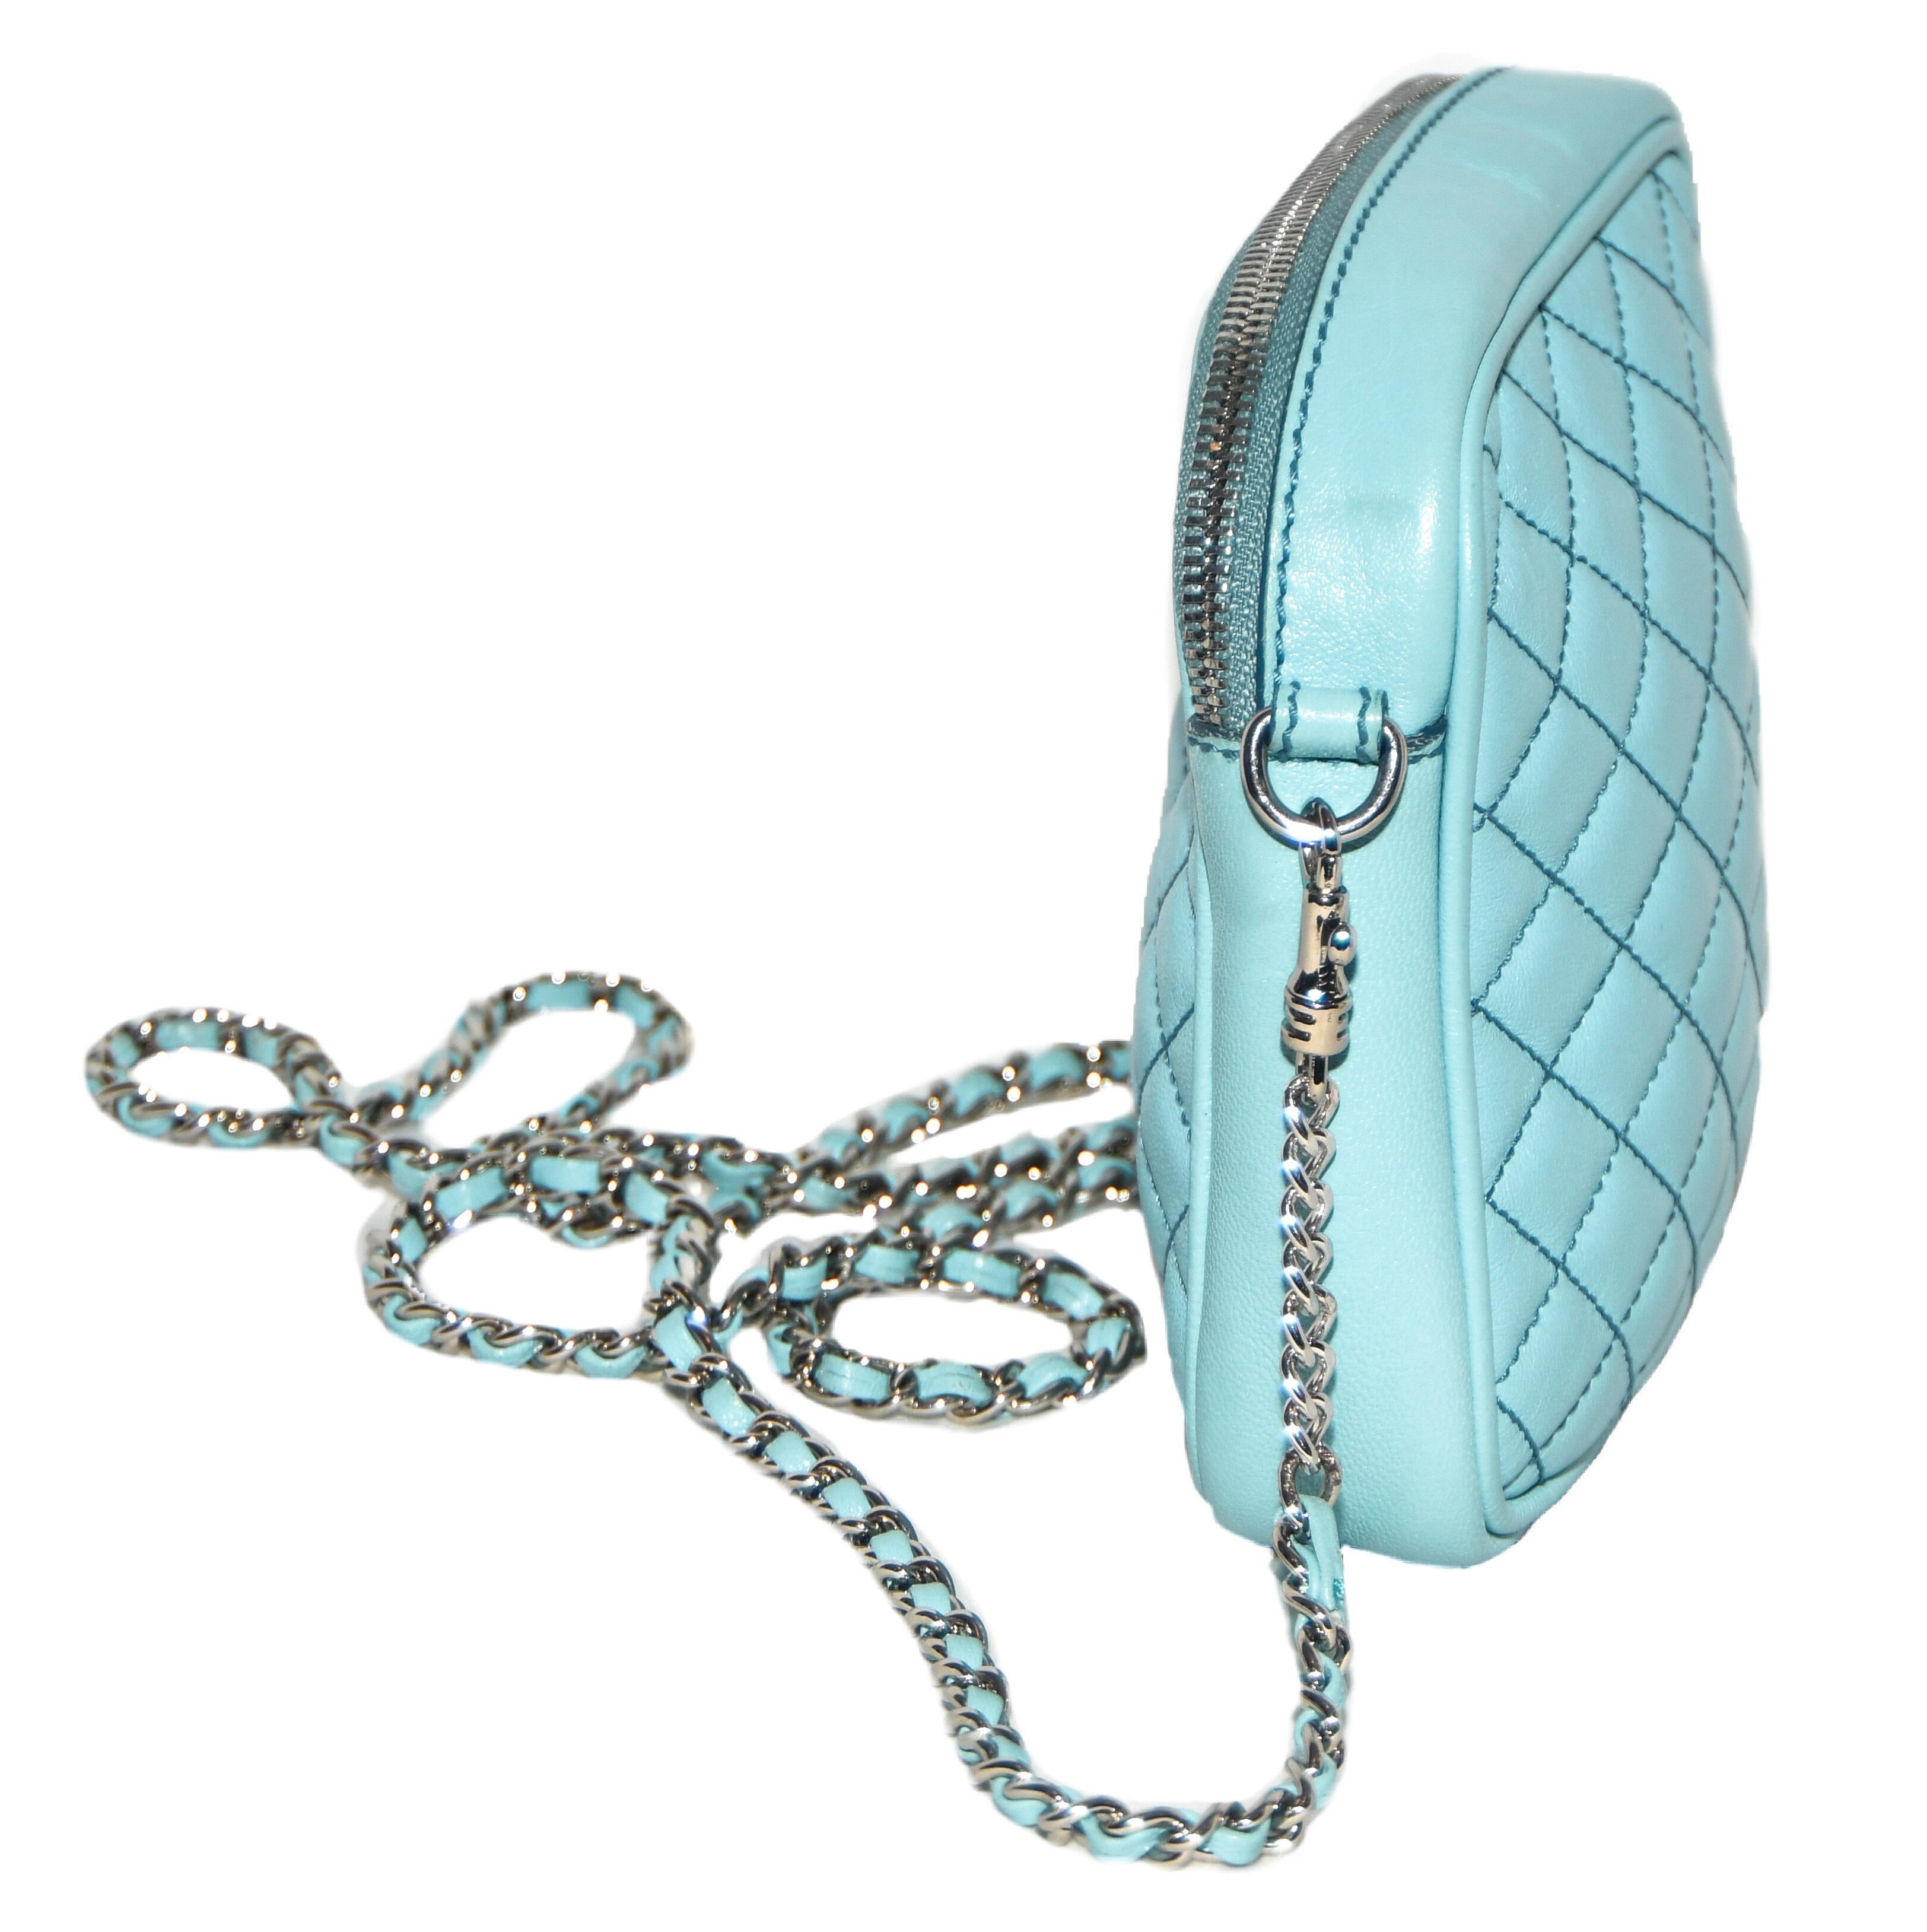 D & G Turquoise Lily Glam Quilted Cross Body Bag In Excellent Condition For Sale In Palm Beach, FL